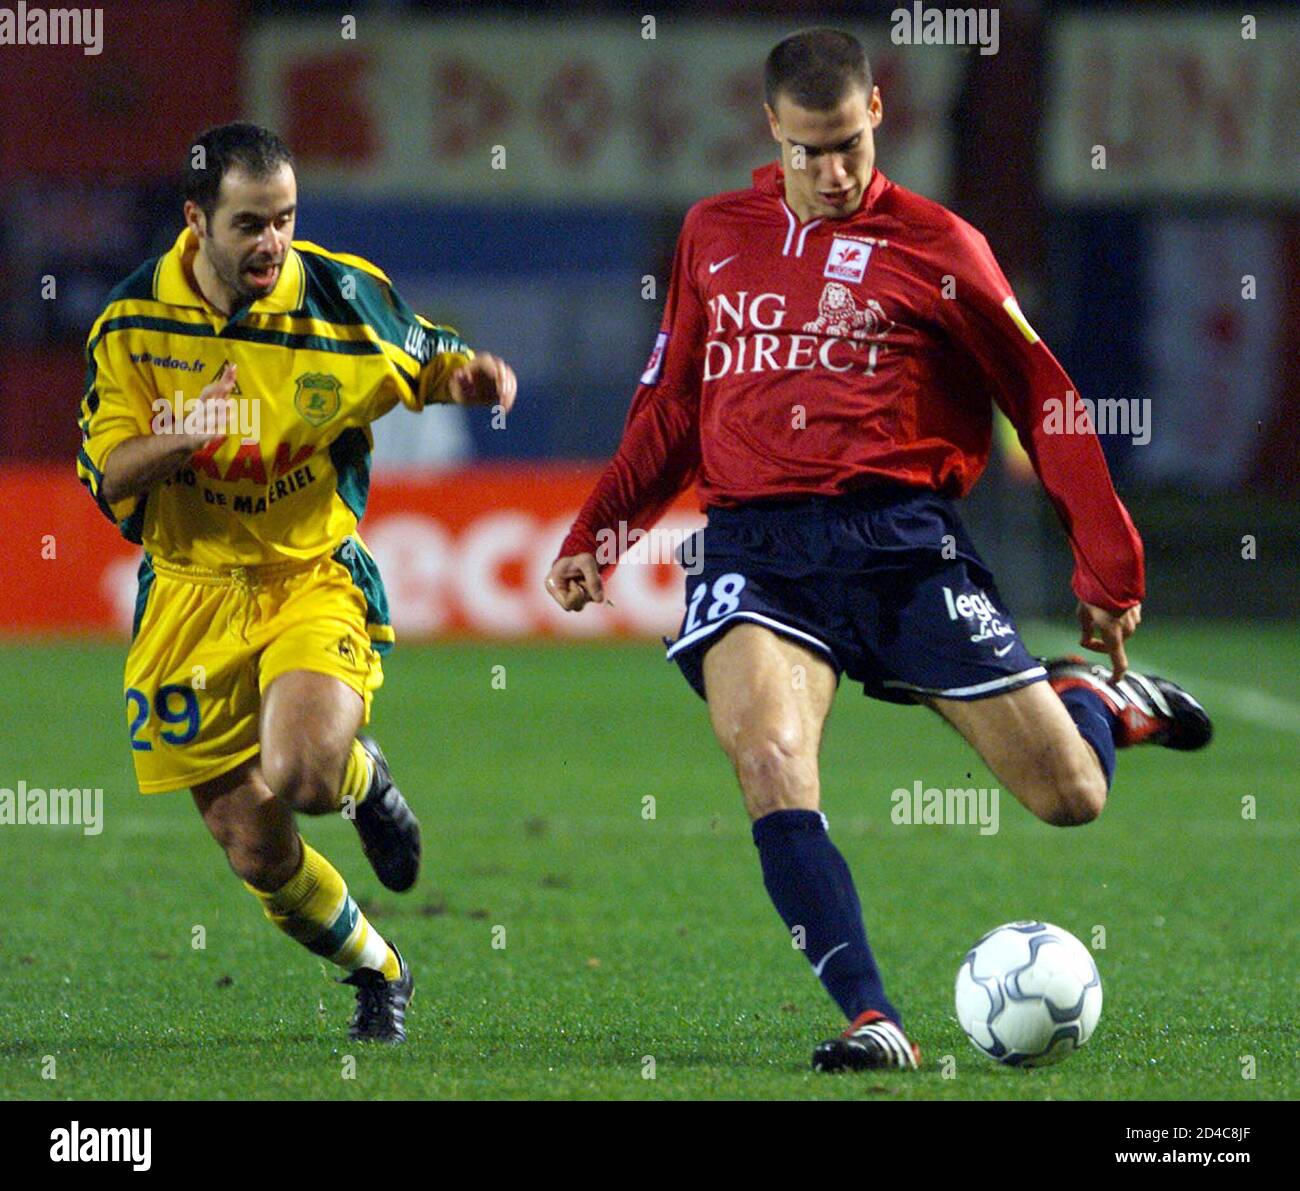 Bruno Cheyrou (R) of Lille controls the ball against Stephane Ziani (L) of  Nantes during early action in their French championship soccer match at the  Grimonprez Jooris stadium in Lille, February 7,